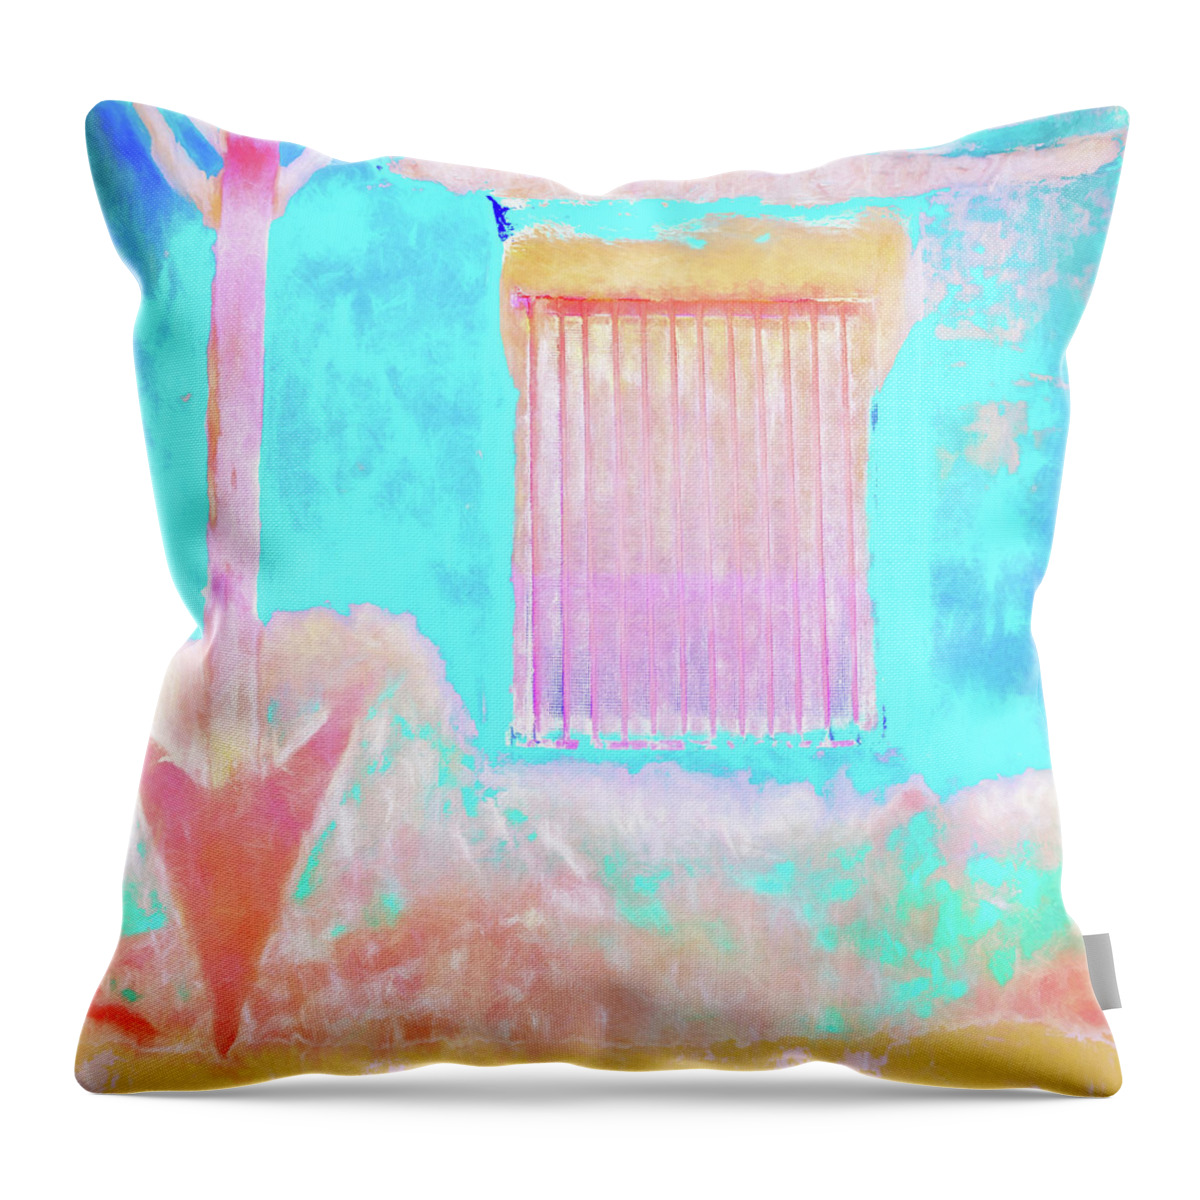 Colorful Walls Throw Pillow featuring the mixed media Used to be Larry's Painterly Effect by Carol Leigh